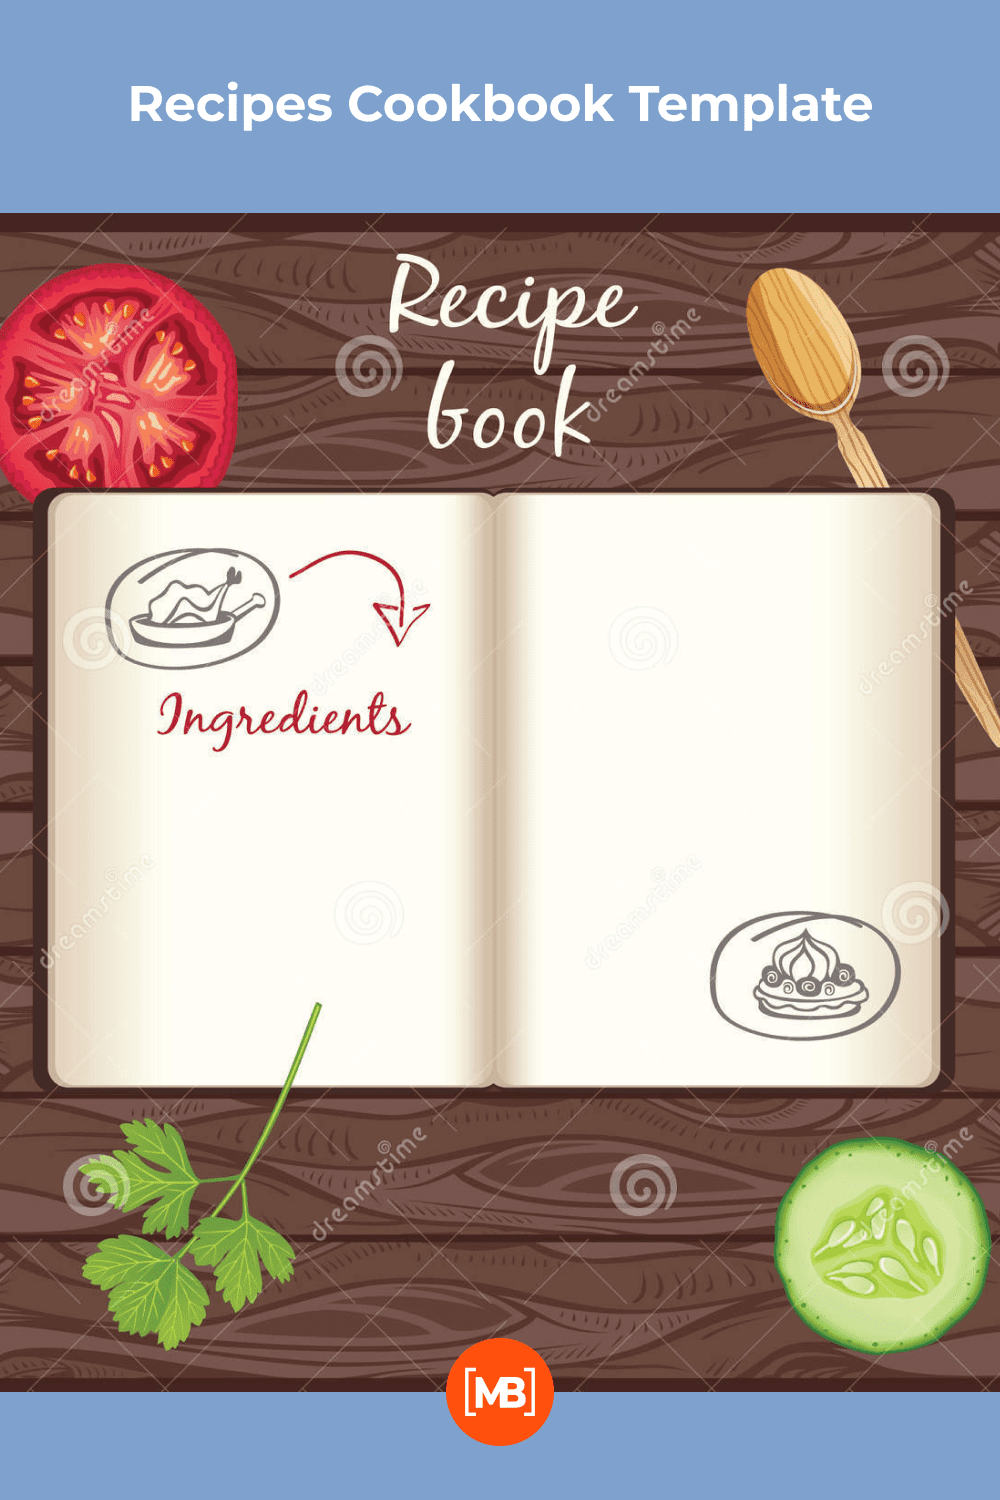 Such a simple sketchbook style recipe book for your meals.